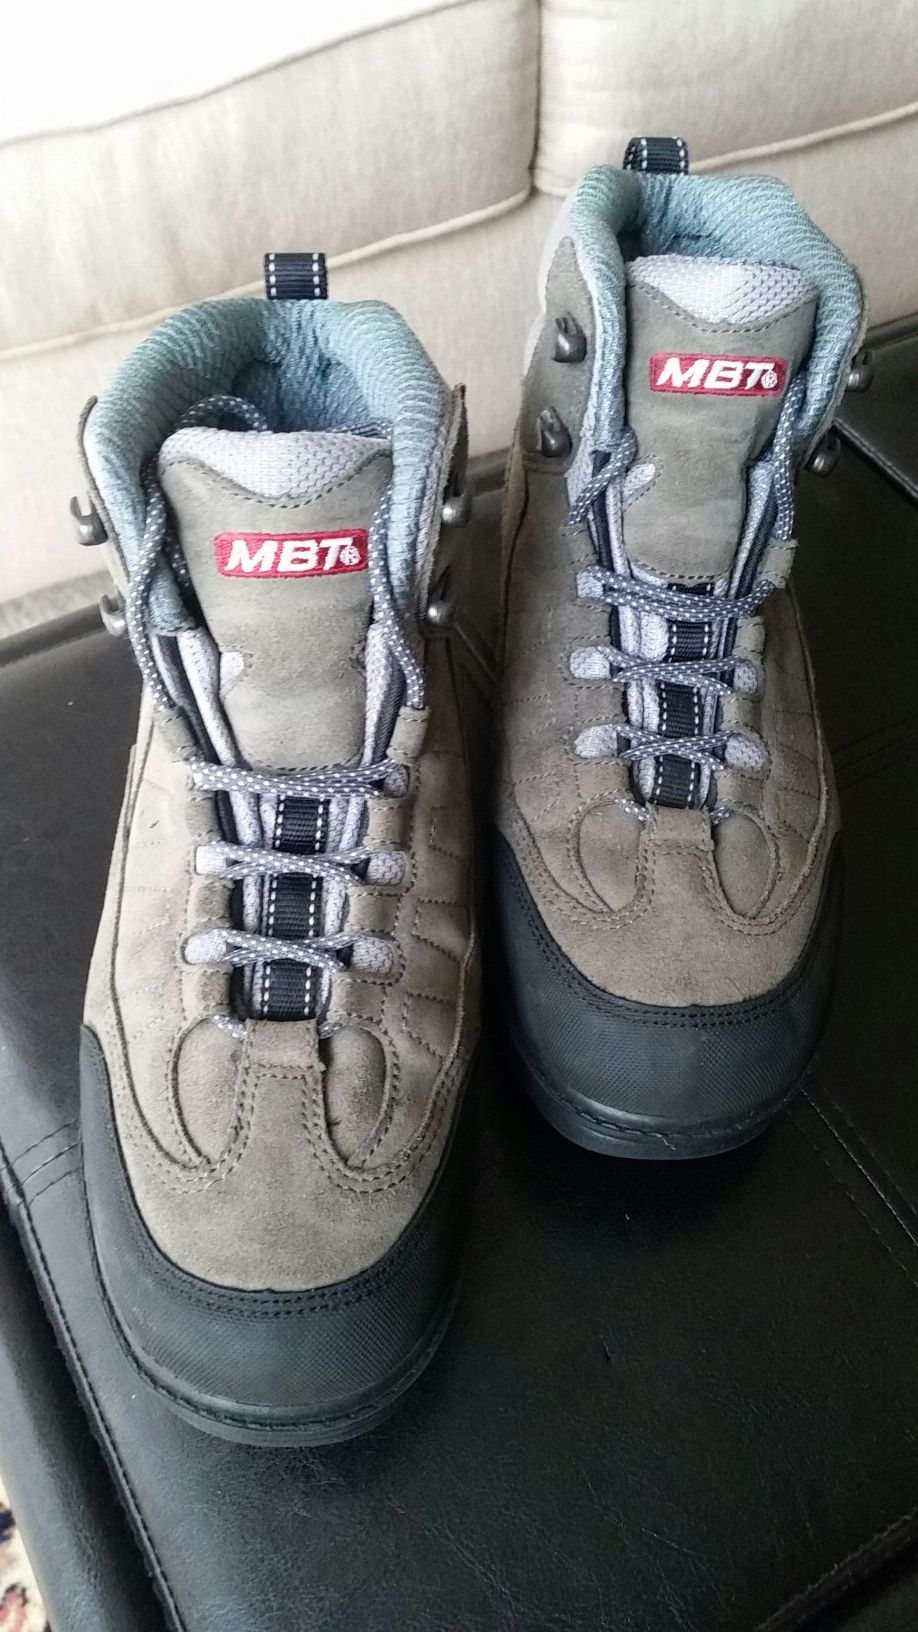 MBT Hiking Womens Boots.